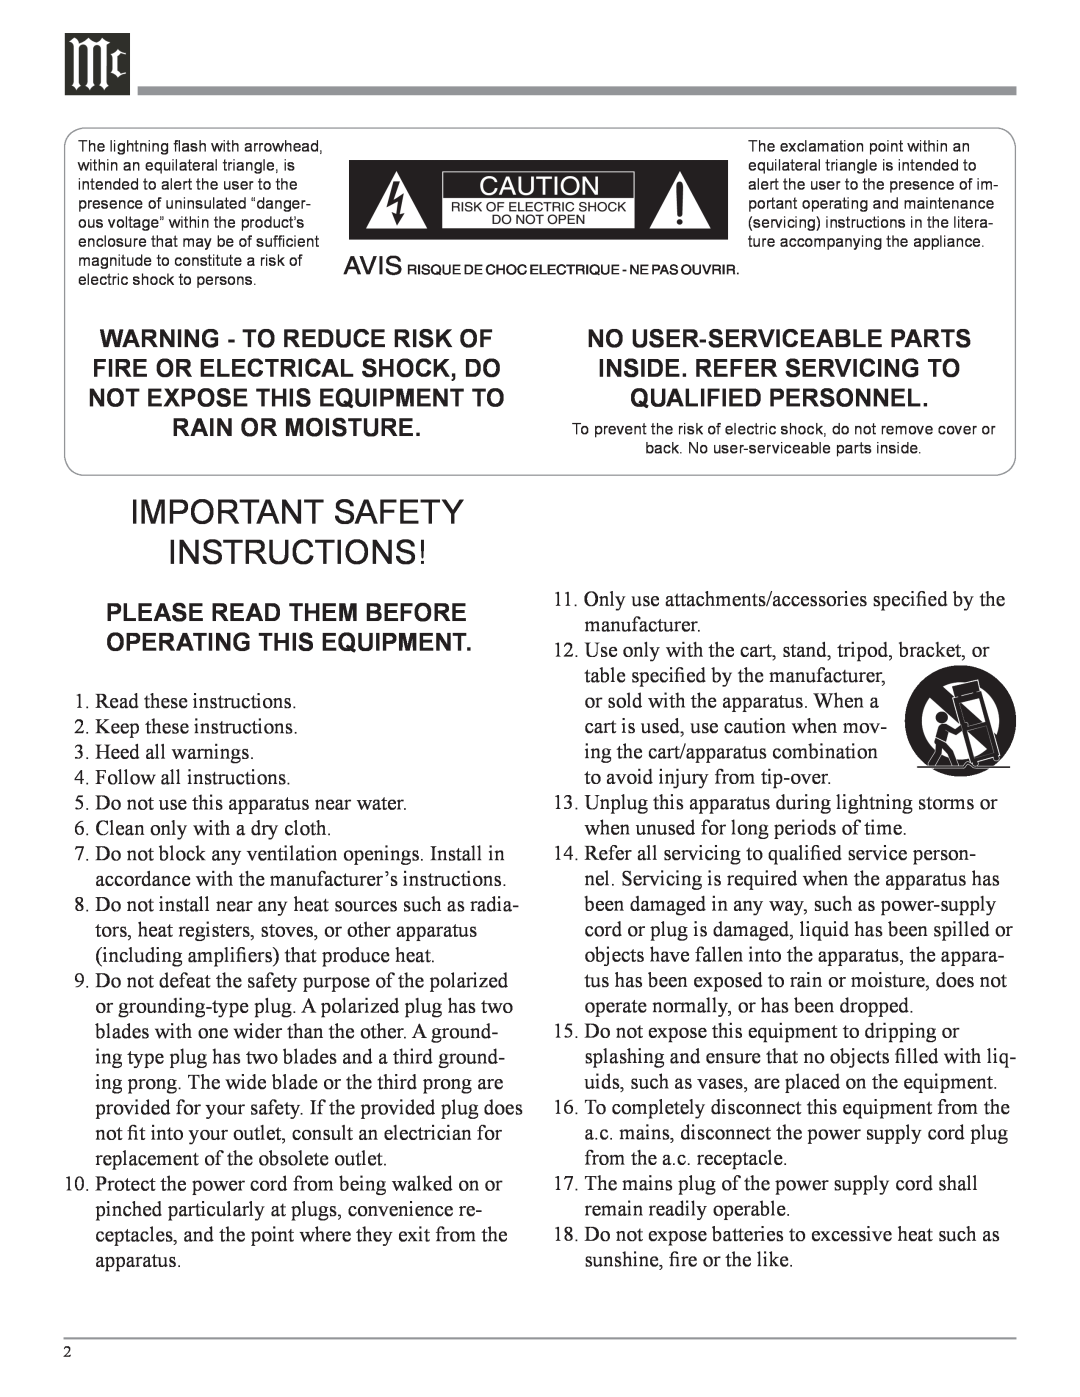 McIntosh MT10 Important Safety Instructions, Rain Or Moisture, Warning - To Reduce Risk Of, No User-Serviceableparts 